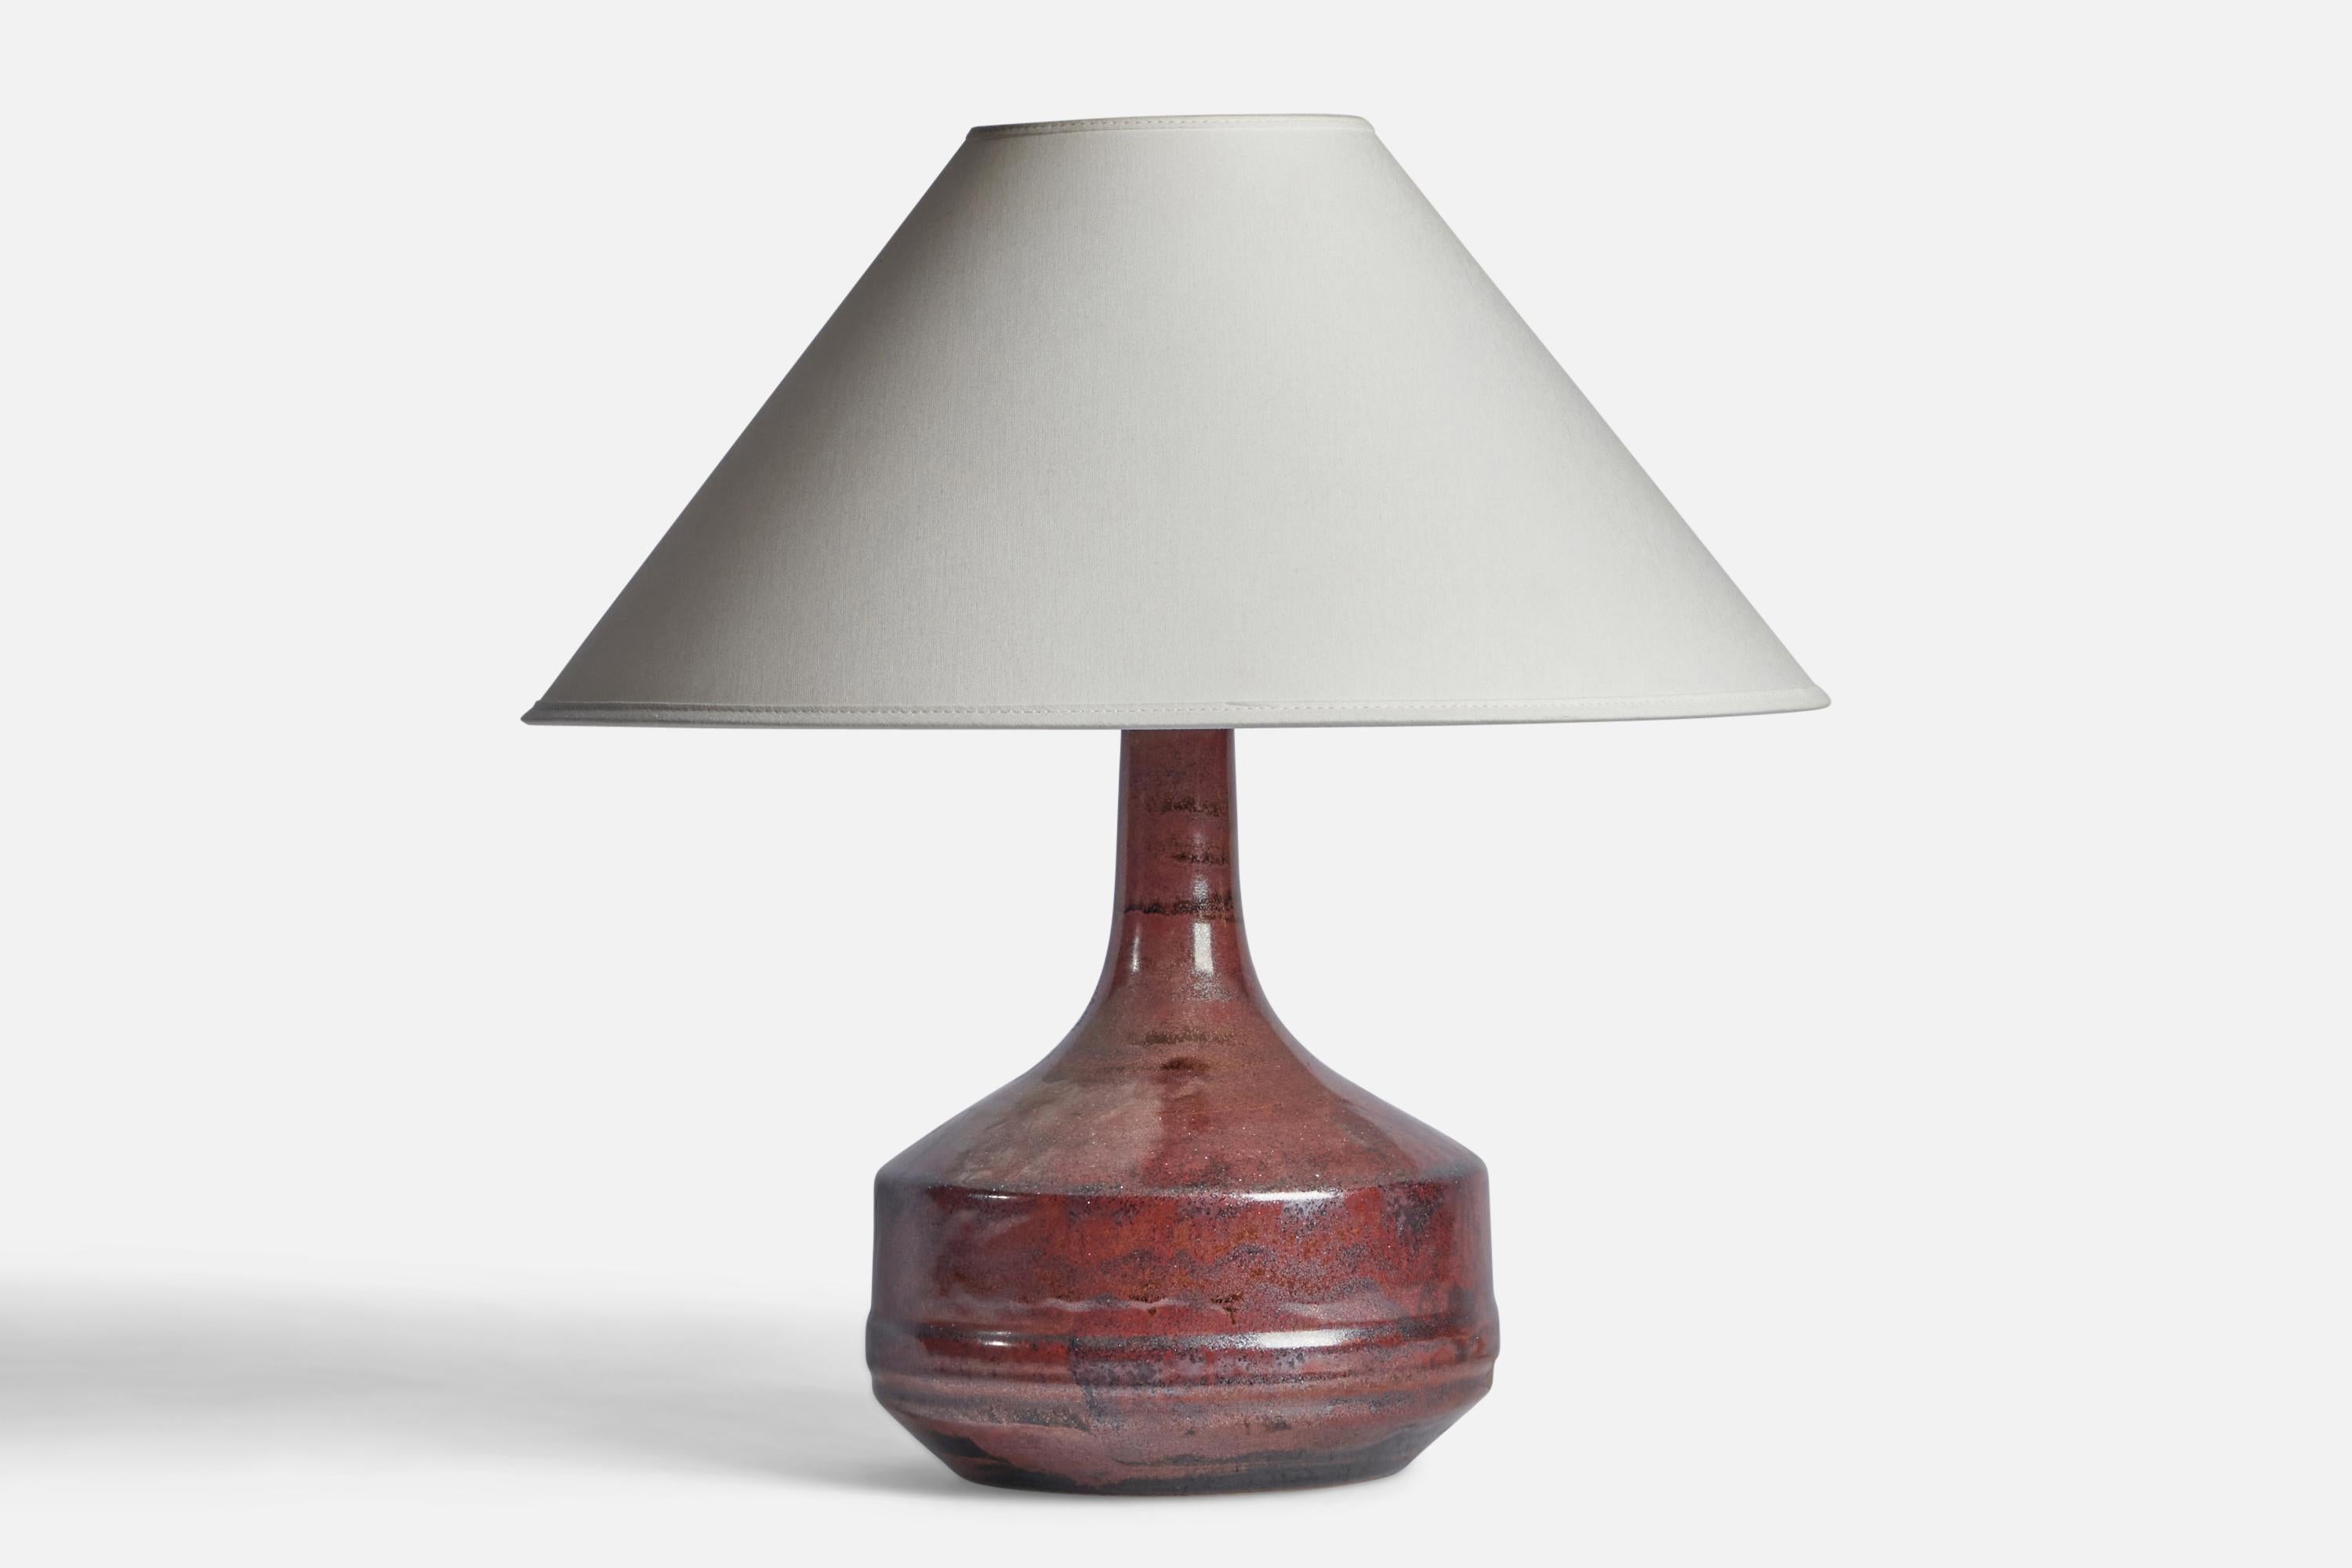 A red-glazed stoneware table lamp designed and produced by Desiree, Denmark, 1960s.

Dimensions of Lamp (inches): 12” H x 7.55” Diameter

Dimensions of Shade (inches): 4.5” Top Diameter x 16” Bottom Diameter x 7.25” H

Dimensions of Lamp with Shade